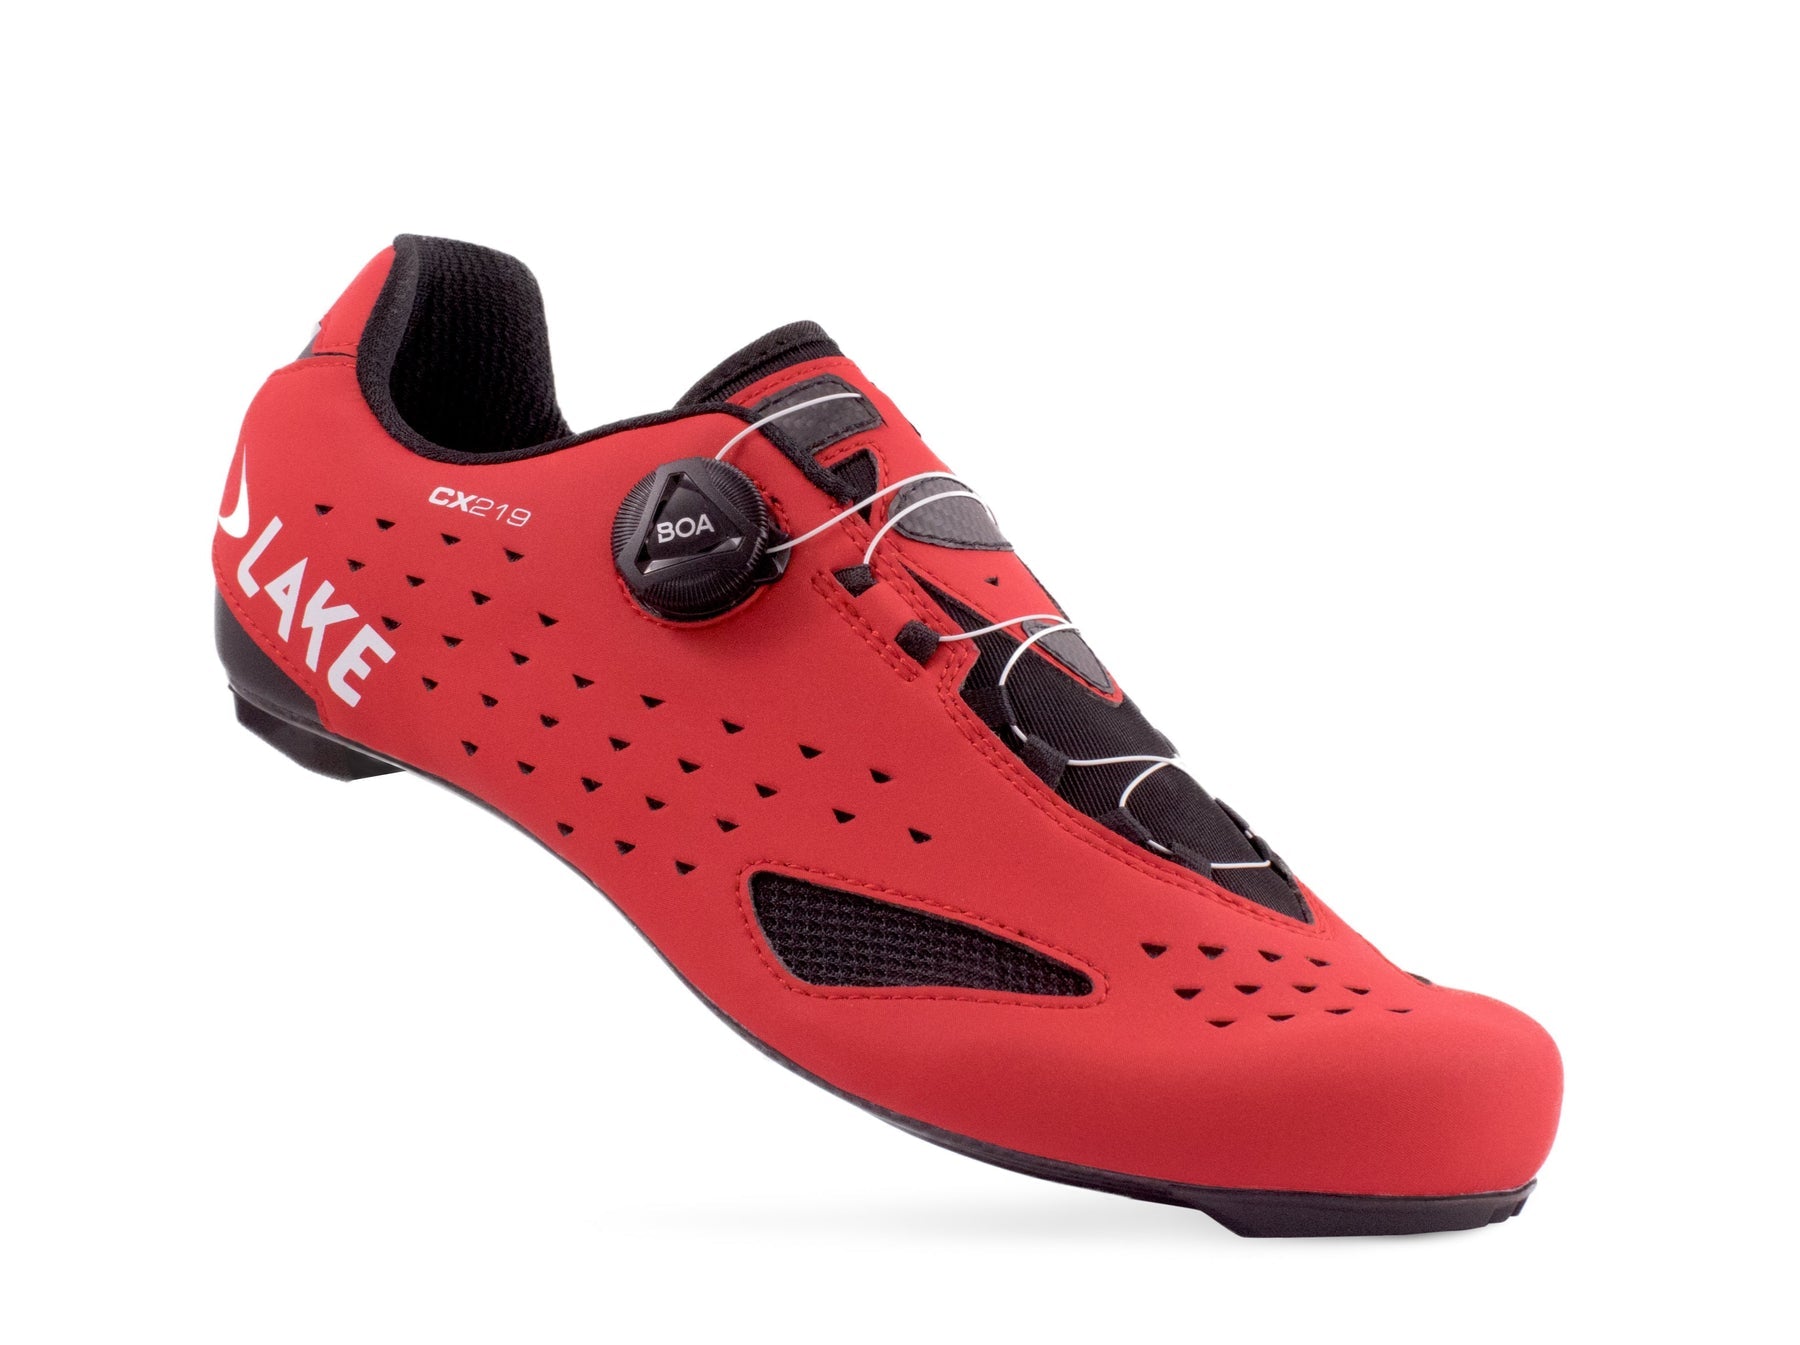 lake shoes CX219-X wide red/white